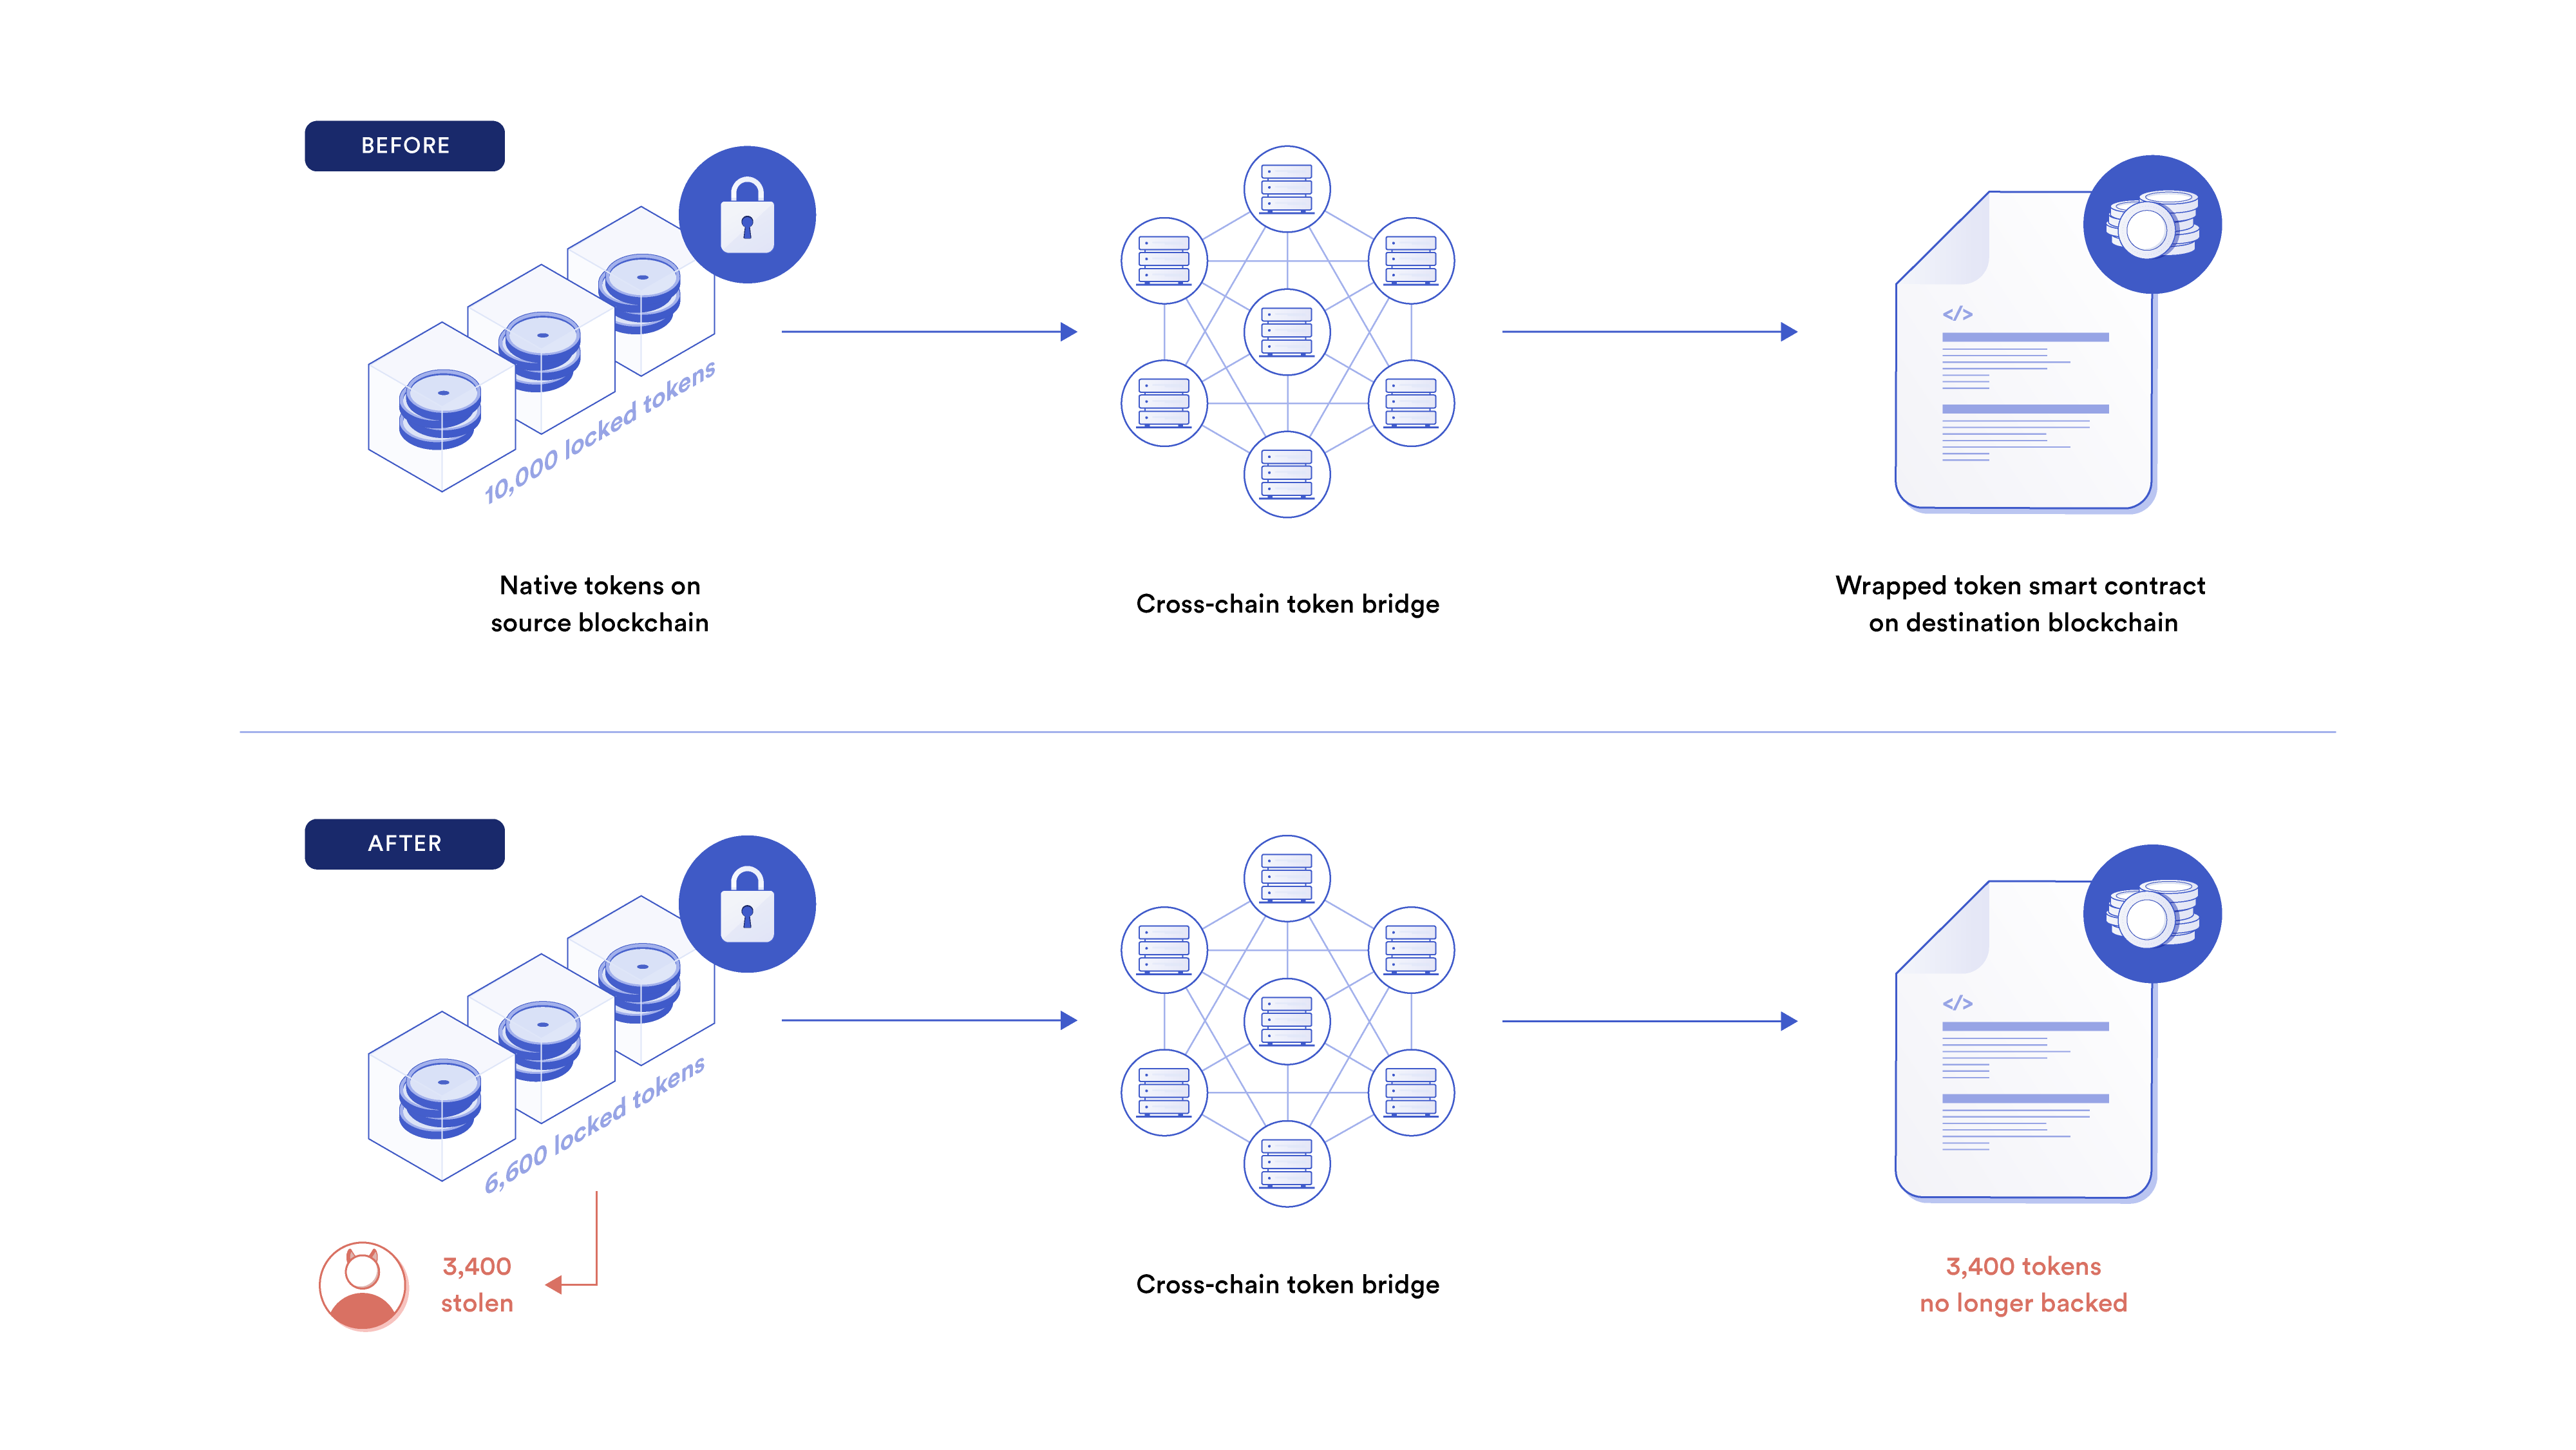 A diagram showing what happens when locked assets on the source blockchain are stolen.